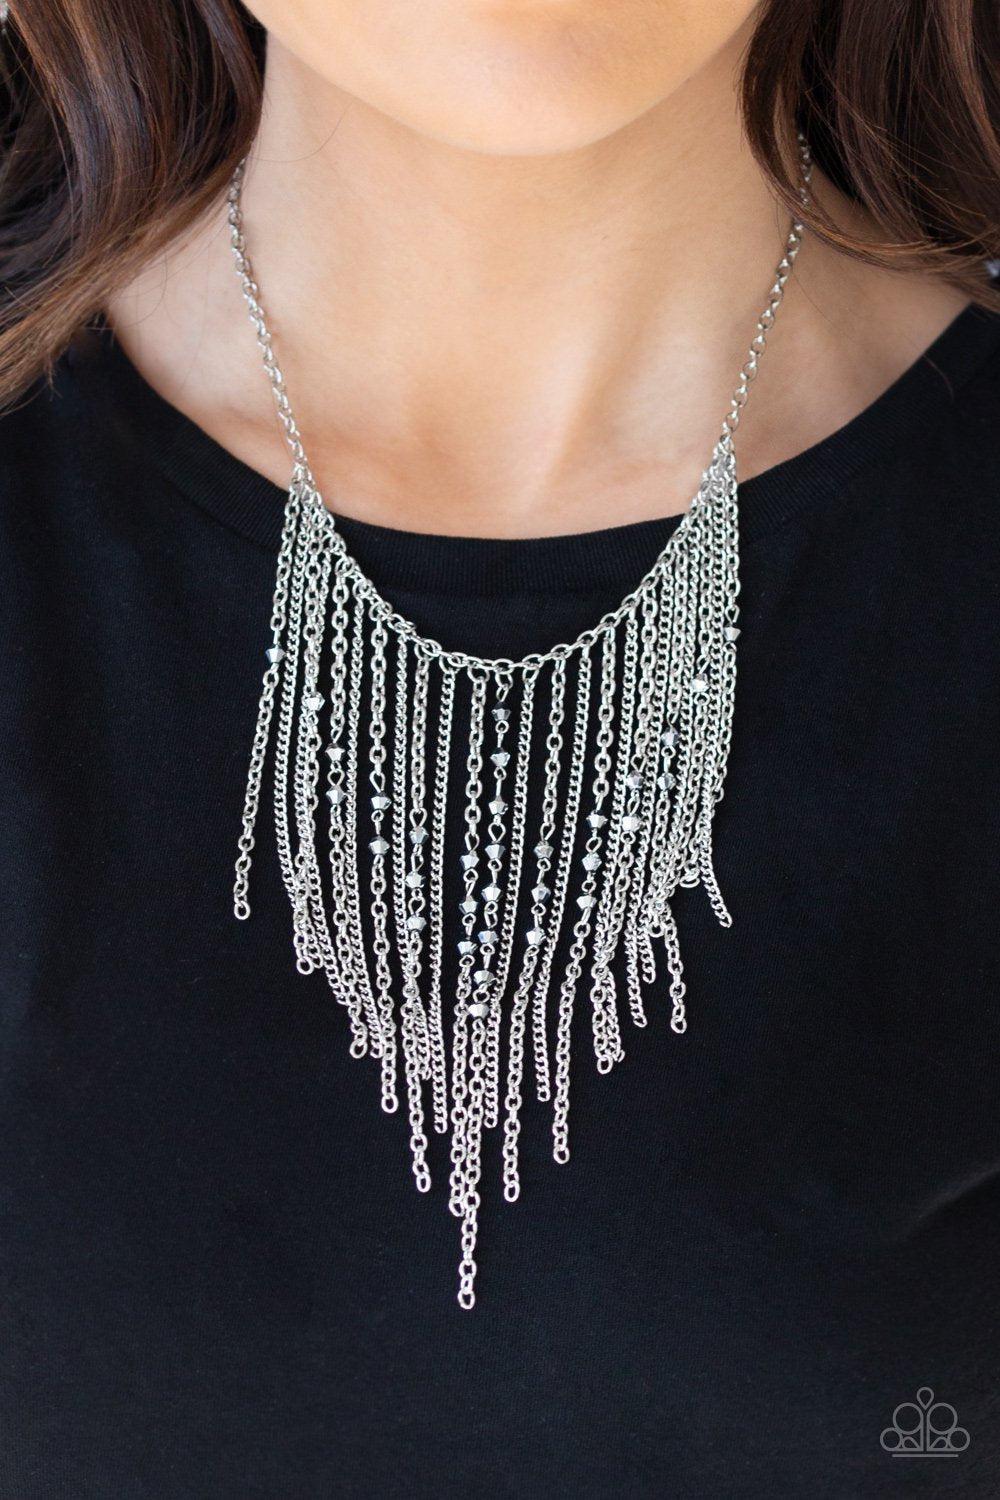 First Class Fringe Silver Necklace and matching Earrings - Paparazzi Accessories-CarasShop.com - $5 Jewelry by Cara Jewels